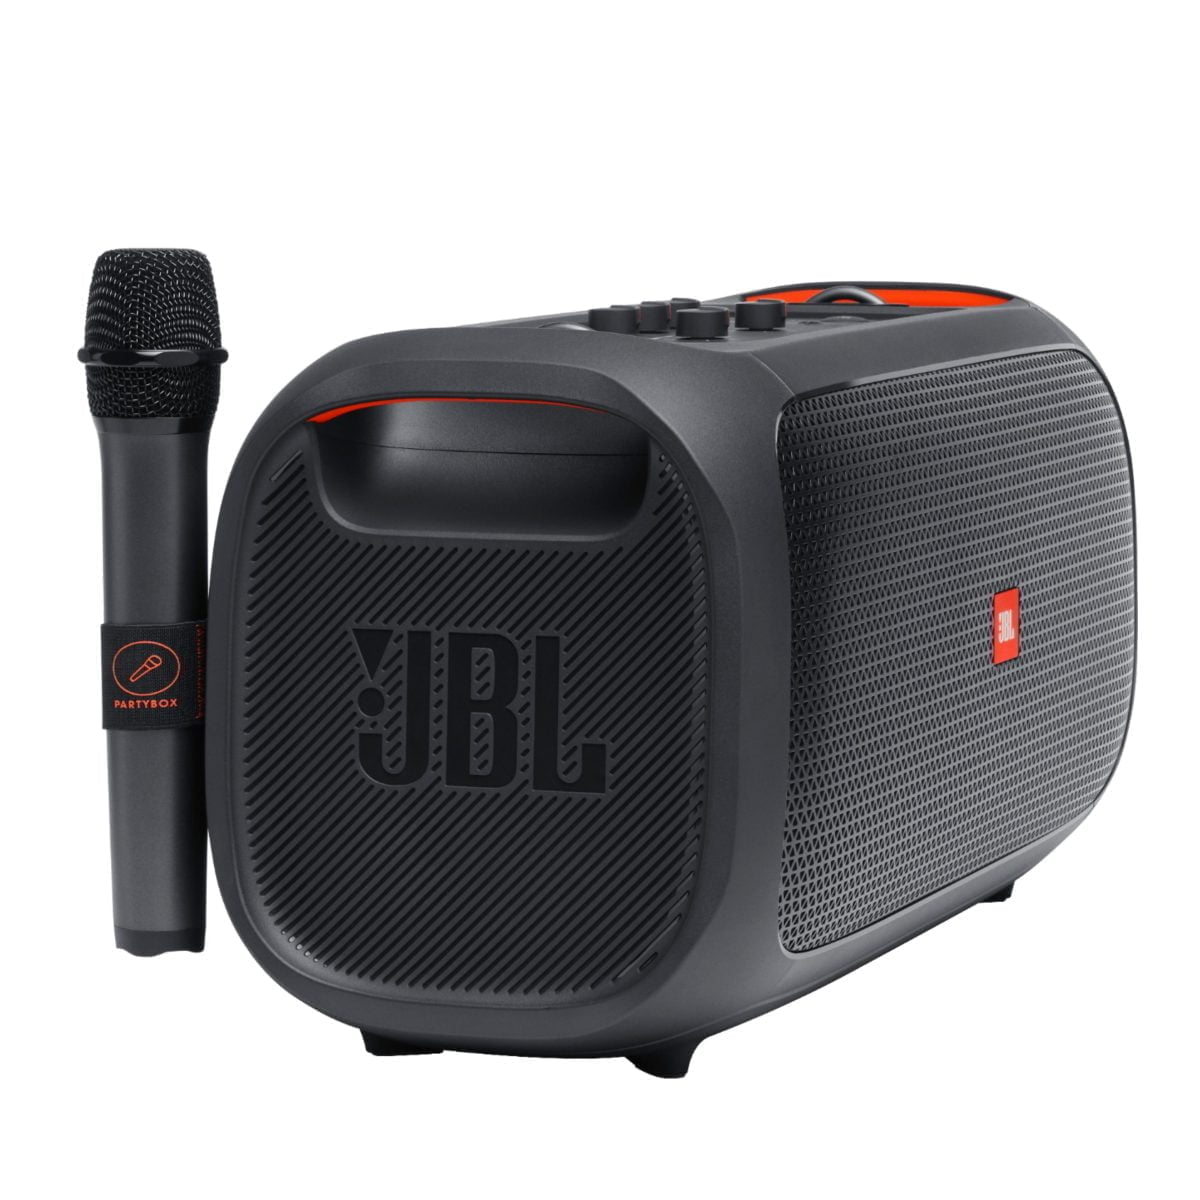 6426699Cv28D Scaled Jbl &Lt;H1 Class=&Quot;Heading-5 V-Fw-Regular&Quot;&Gt;Jbl - Partybox On-The-Go Portable Party Speaker - Black&Lt;/H1&Gt; Take Your Party Anywhere And Sing Everywhere. From Beach Parties To Festivals, The Jbl Partybox On-The-Go Lets You See, Hear And Feel The Beat. Turn It Up Loud With 100 Watts Of Powerful Jbl Pro Sound, Synched To A Dazzling Light Show. Access Your Favorite Tunes With Bluetooth, Usb, Aux And Tws (True Wireless Stereo) Connectivity, Grab A Friend And Sing Your Hearts Out With The Jbl Wireless Mics, Or Use The Instrument Input To Play Along. With A Bottle Opener, Padded Shoulder Strap, Rechargeable Battery And Ipx4 Splash-Proof Protection, The Jbl Partybox On-The-Go Has Everything You Need To Get The Party Started—And Take It With You. Jbl Partybox Jbl Partybox On-The-Go Portable Party Speaker - Black